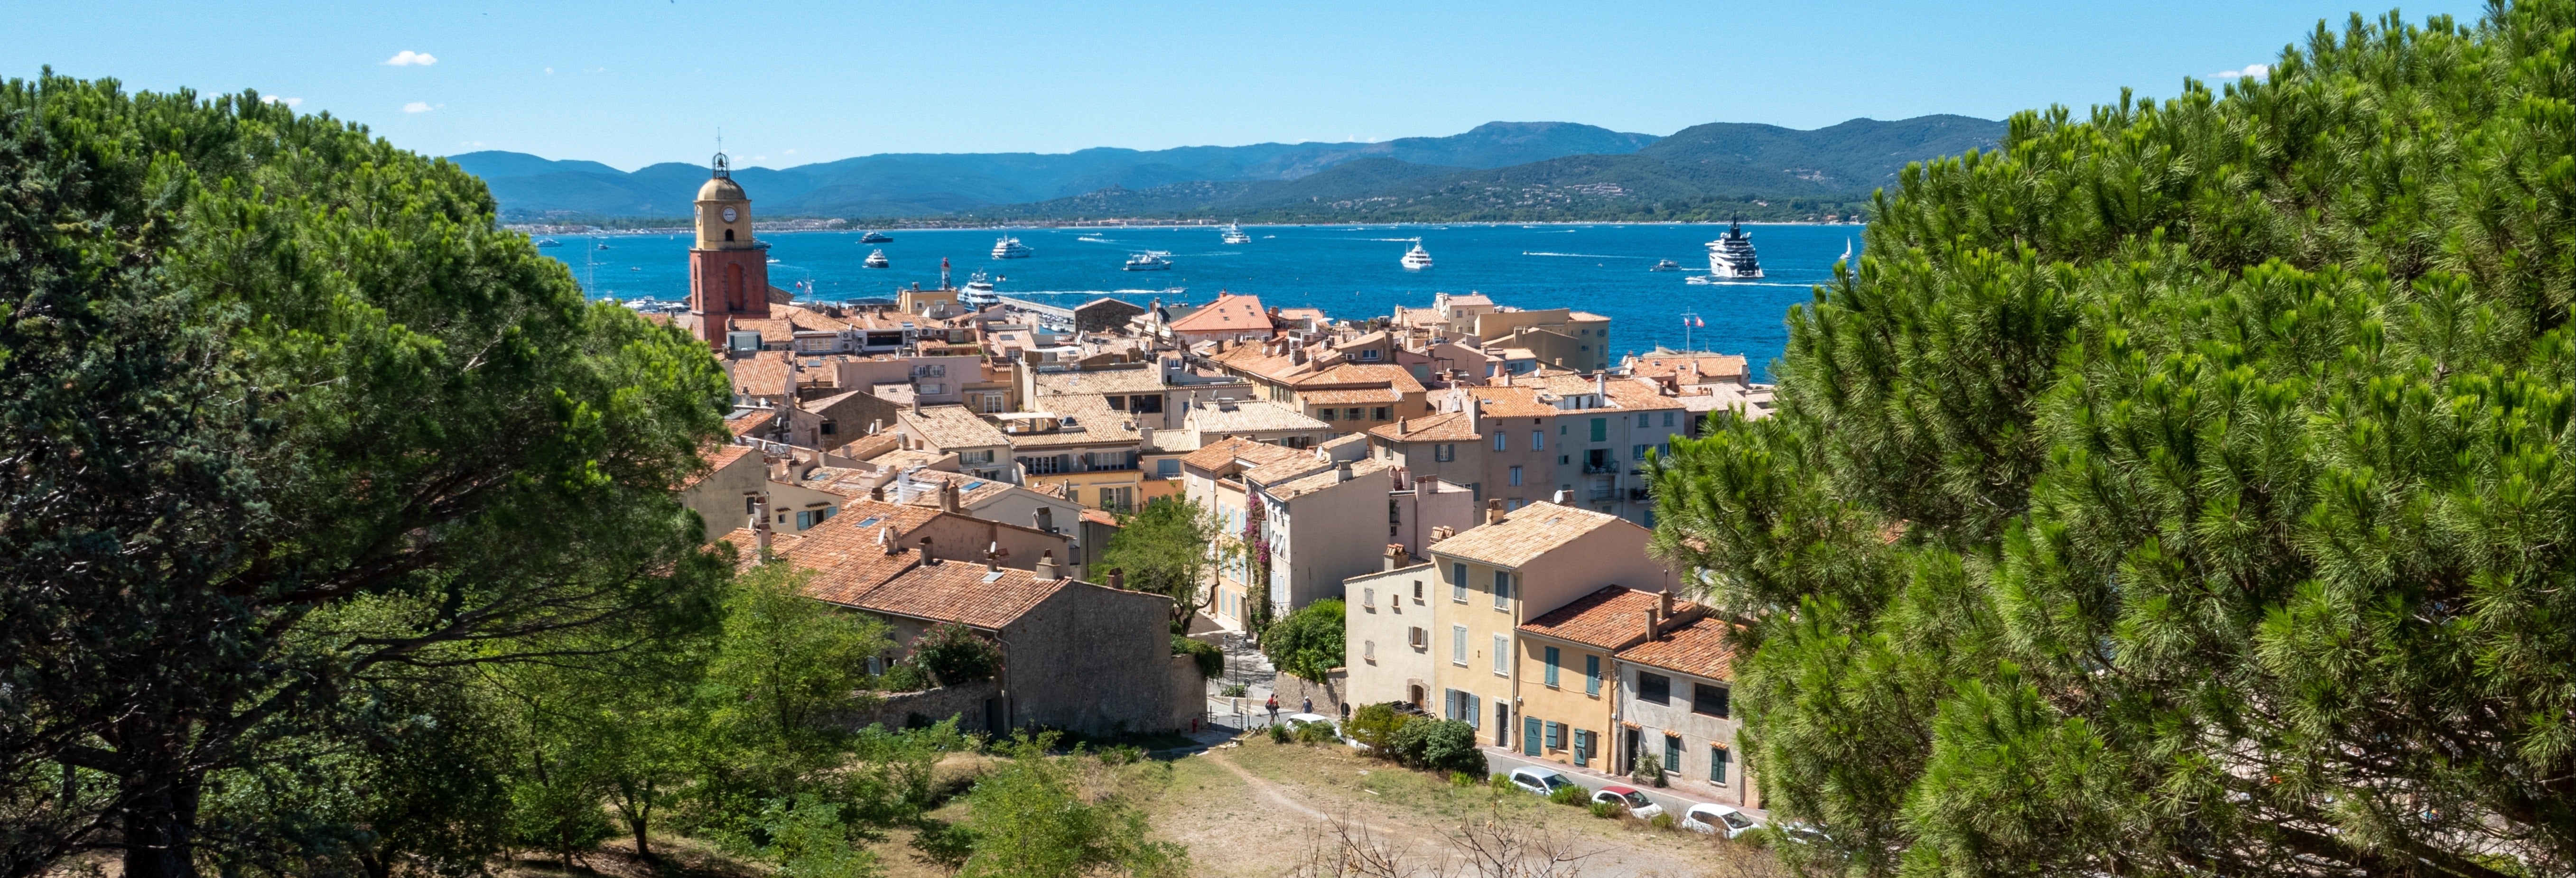 Activities, Guided Tours and Day Trips in Saint-Tropez - Civitatis